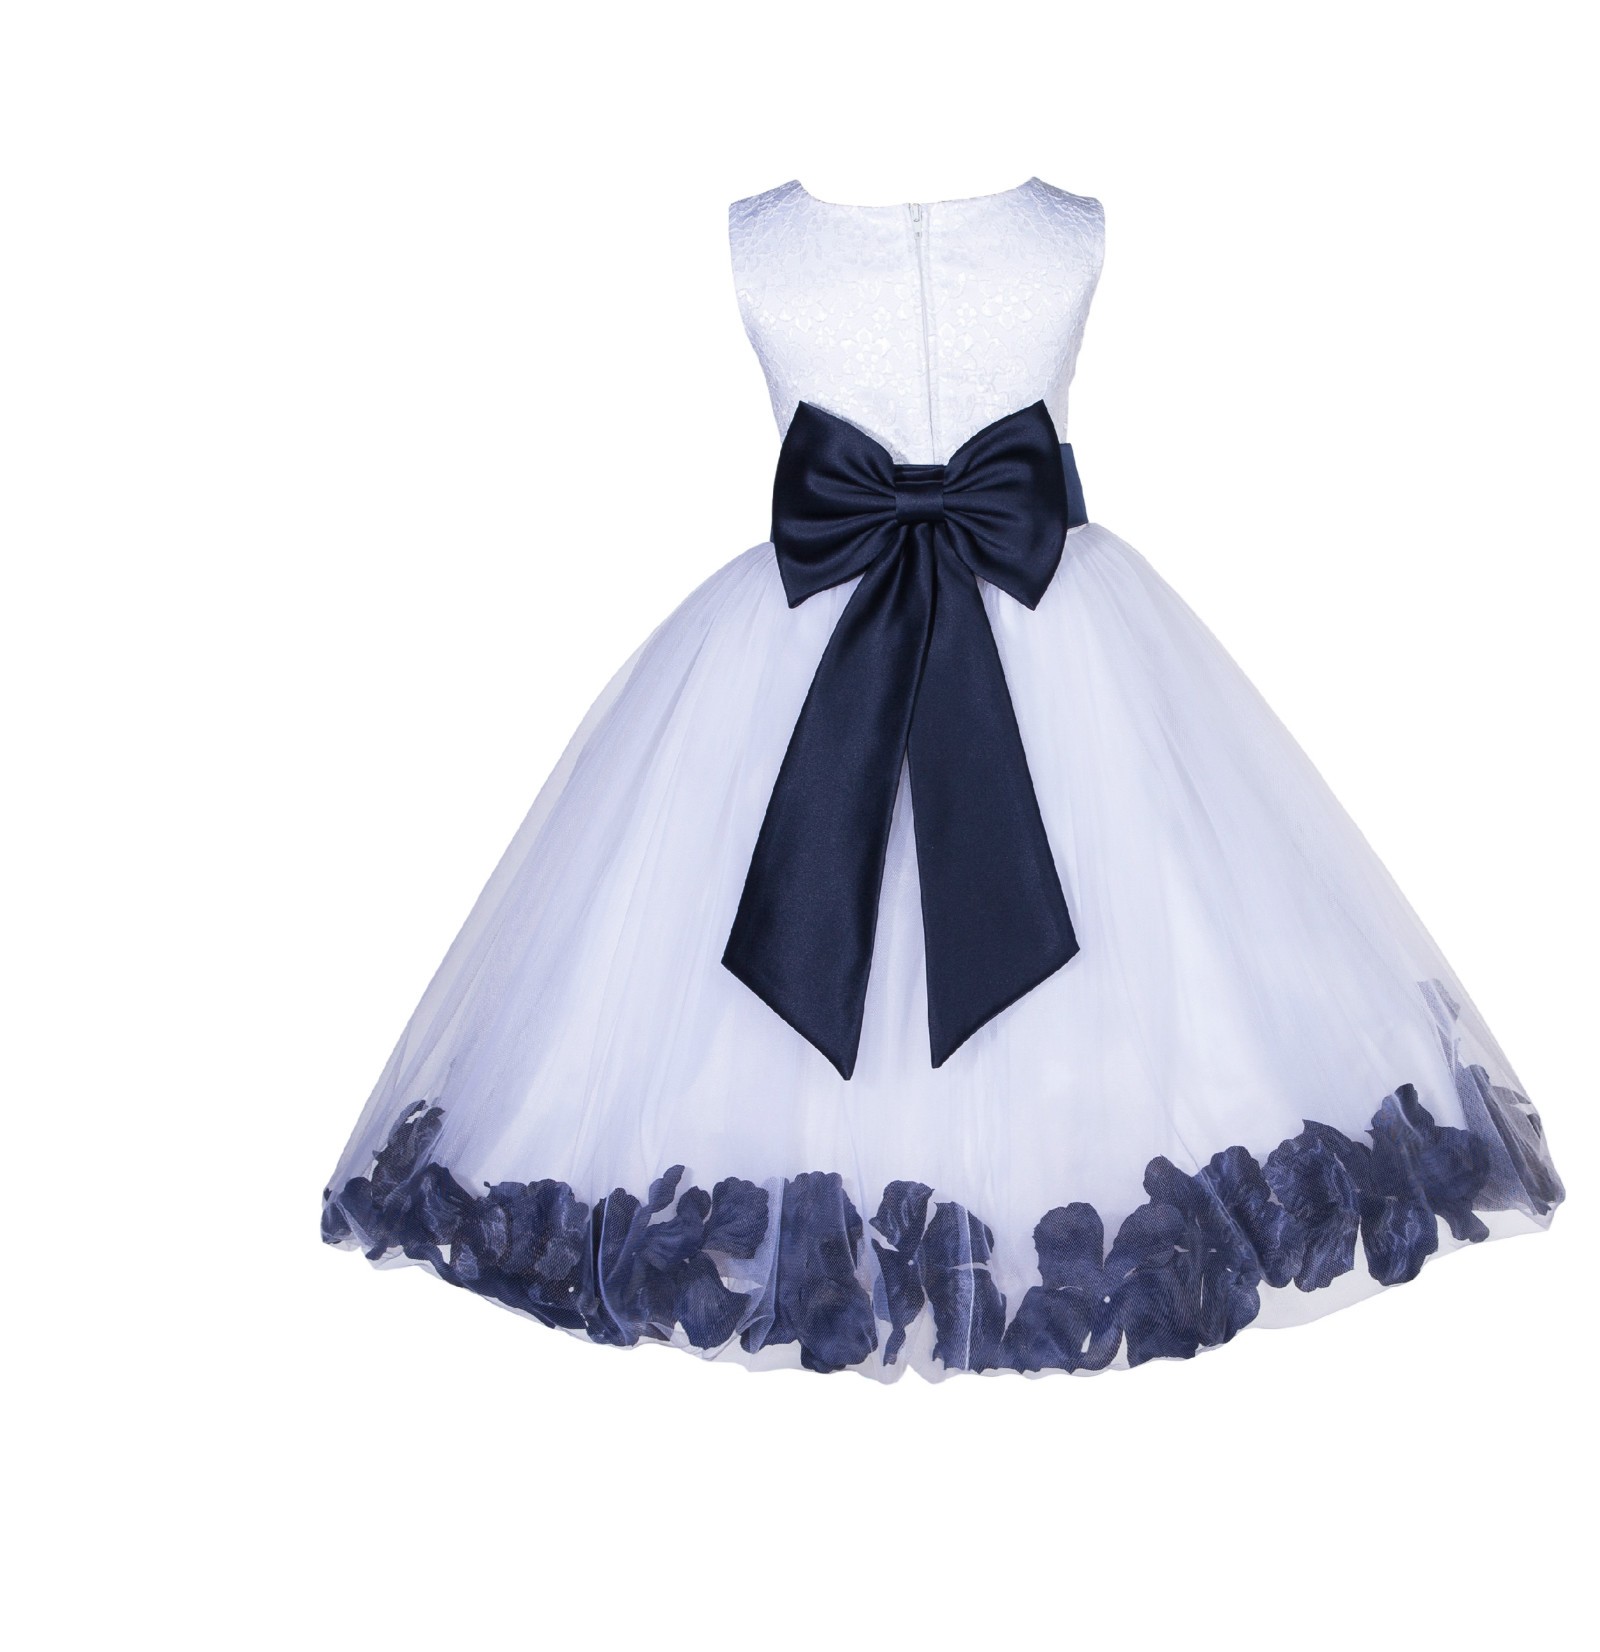 White/Marine Lace Top Tulle Floral Petals Flower Girl Dress 165T